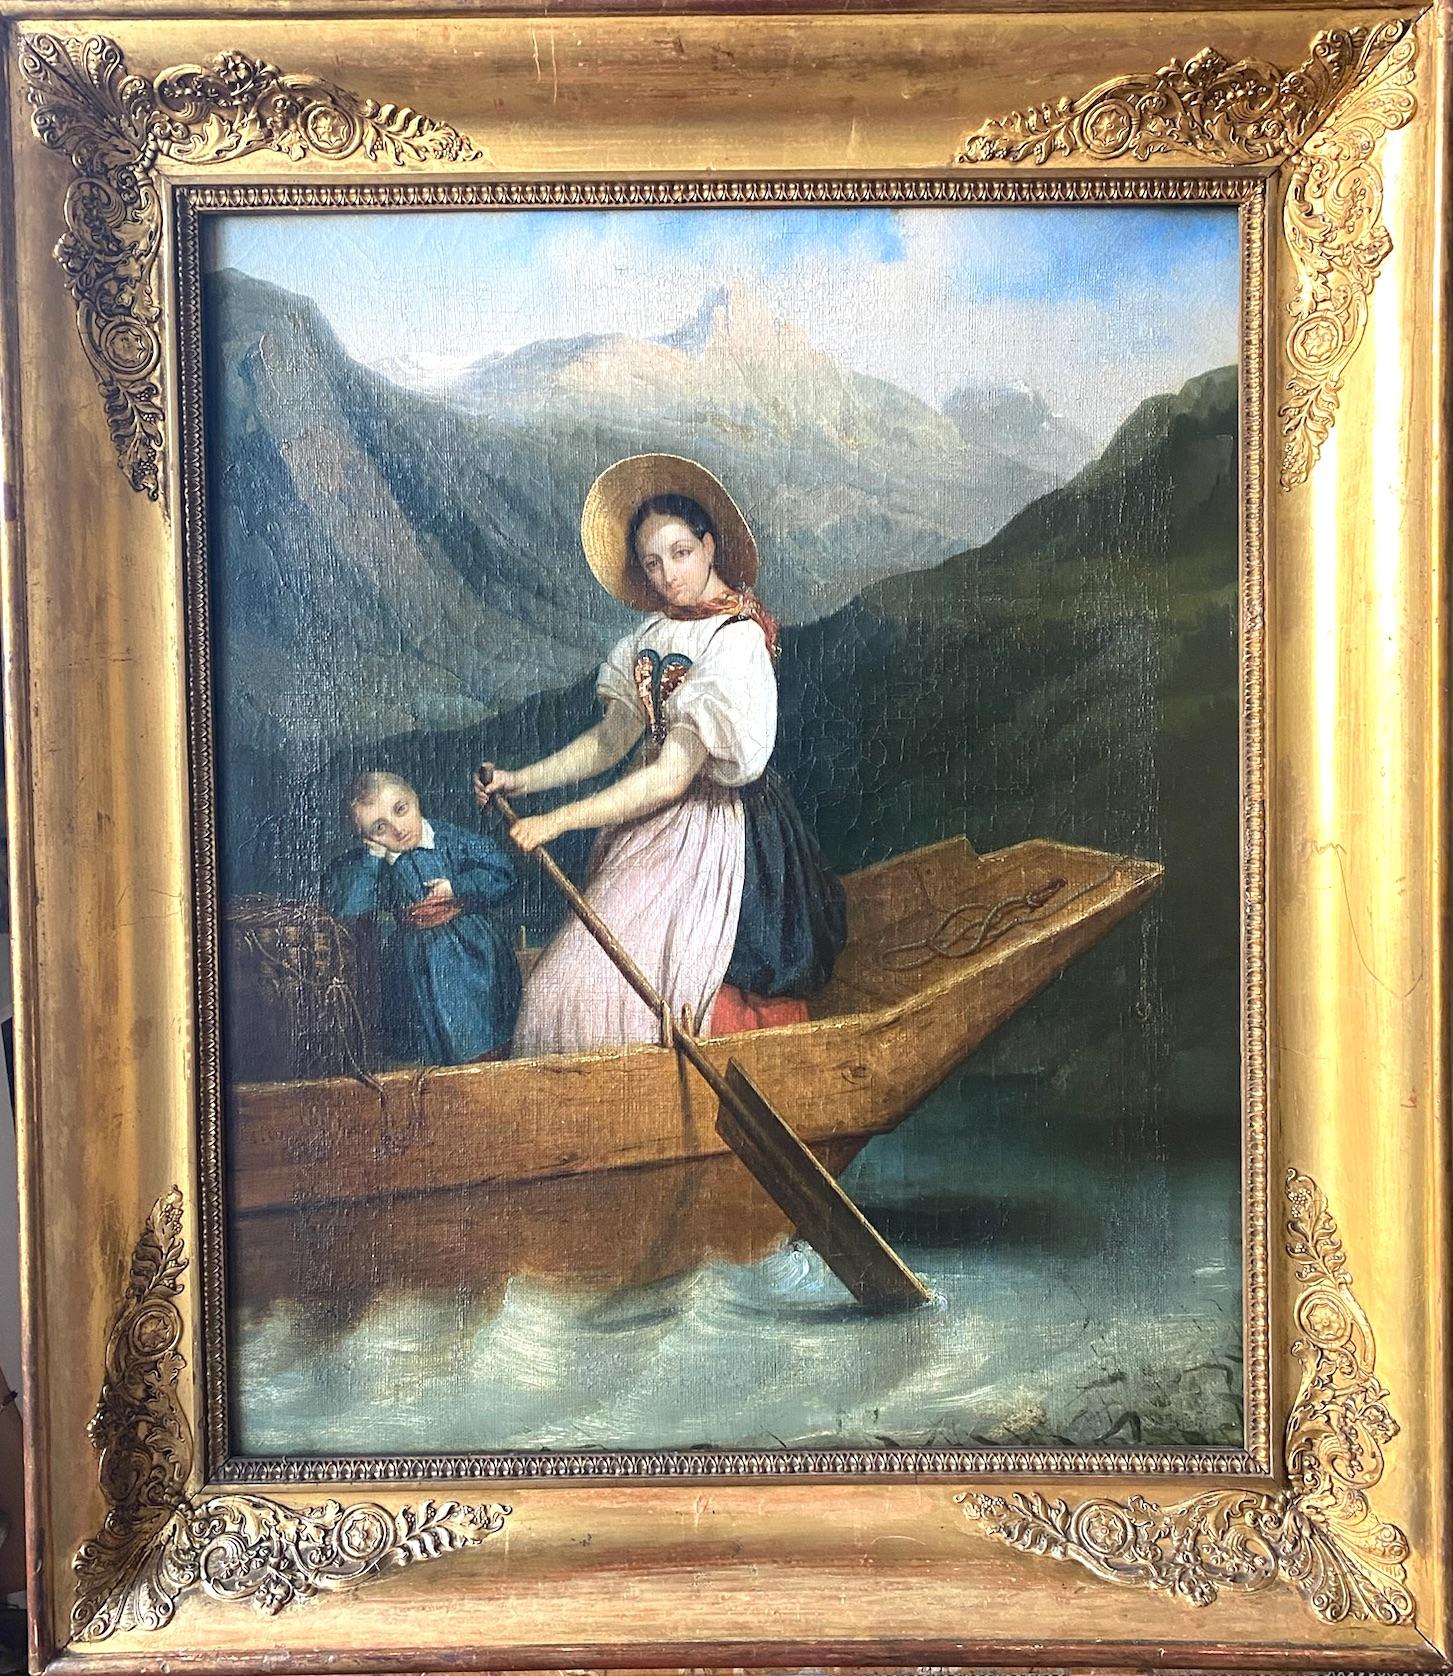 The Fair Skipper: boating on a mountain lake ca 1830 the Swiss Alps painting  - Romantic Painting by Unknown